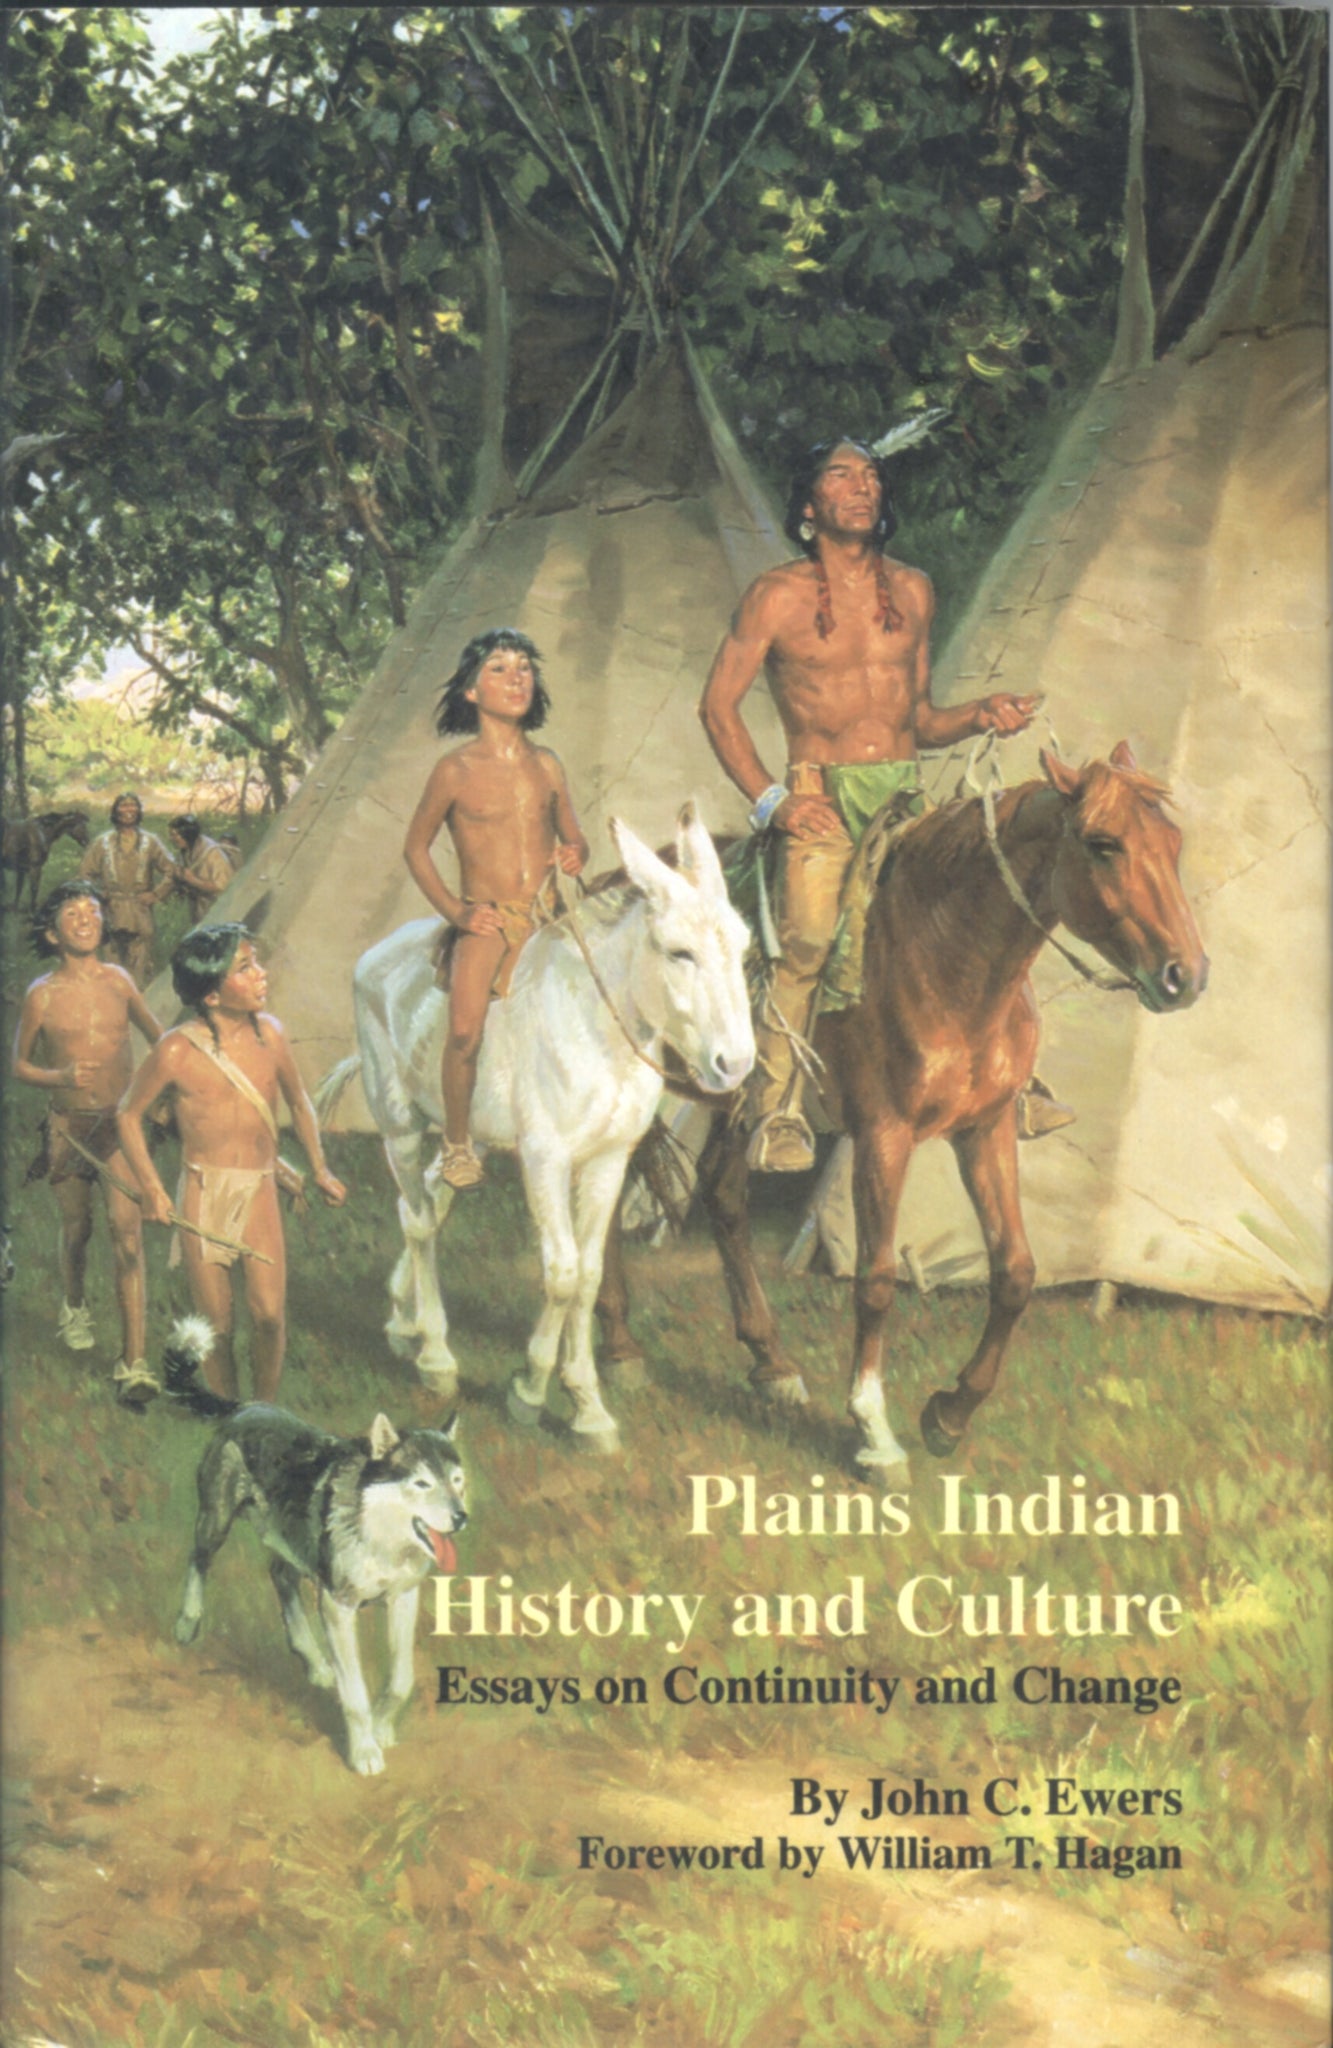 Plains Indian History and Culture: Essays on Continuity and Change (Hardcover)